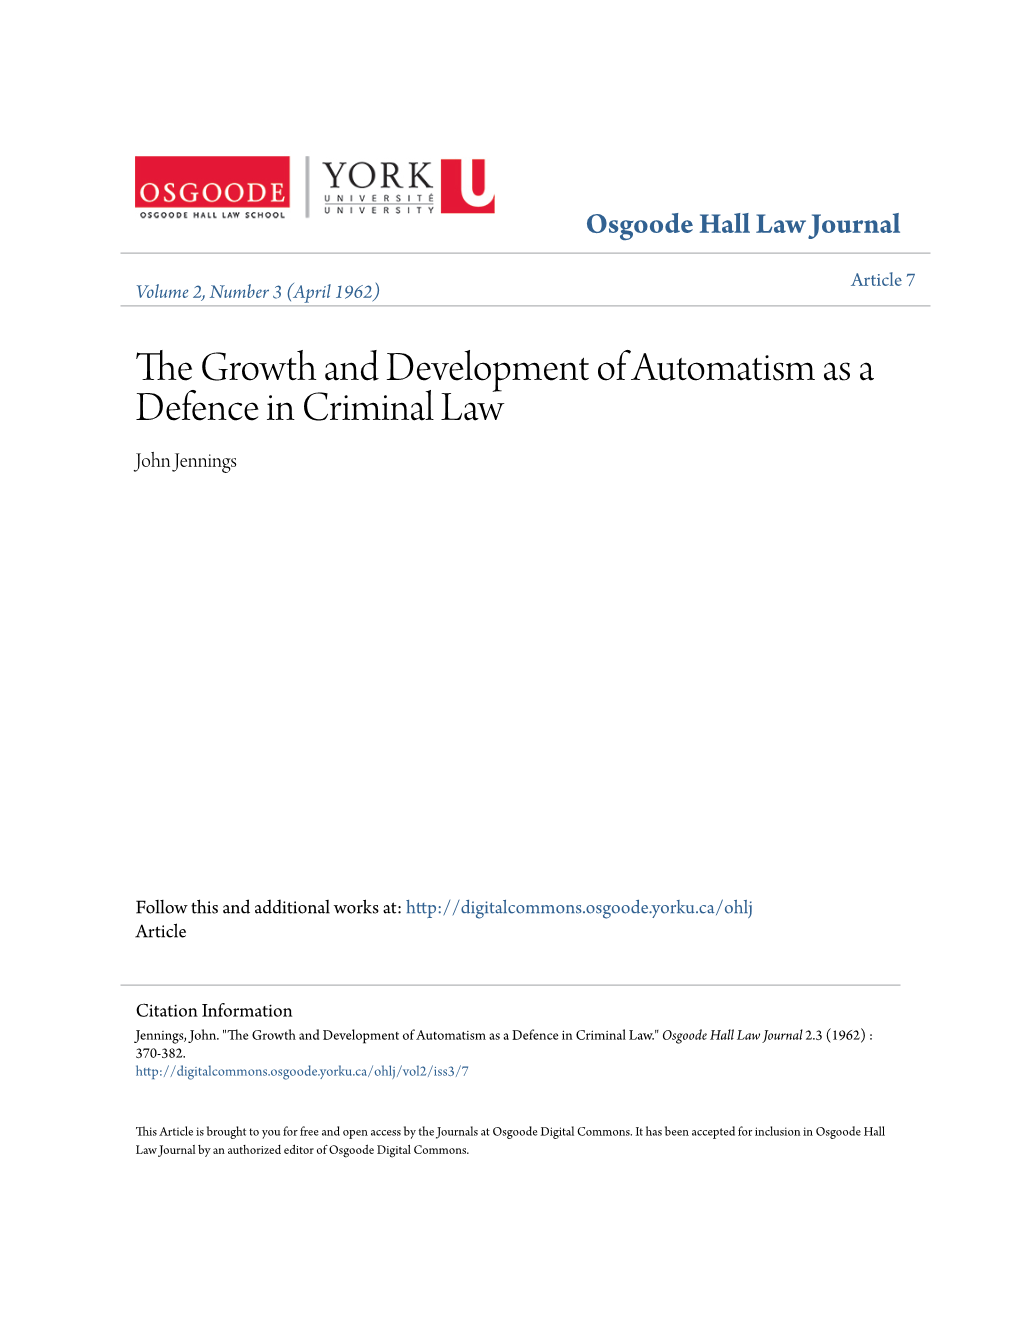 The Growth and Development of Automatism As a Defence in Criminal Law John Jennings